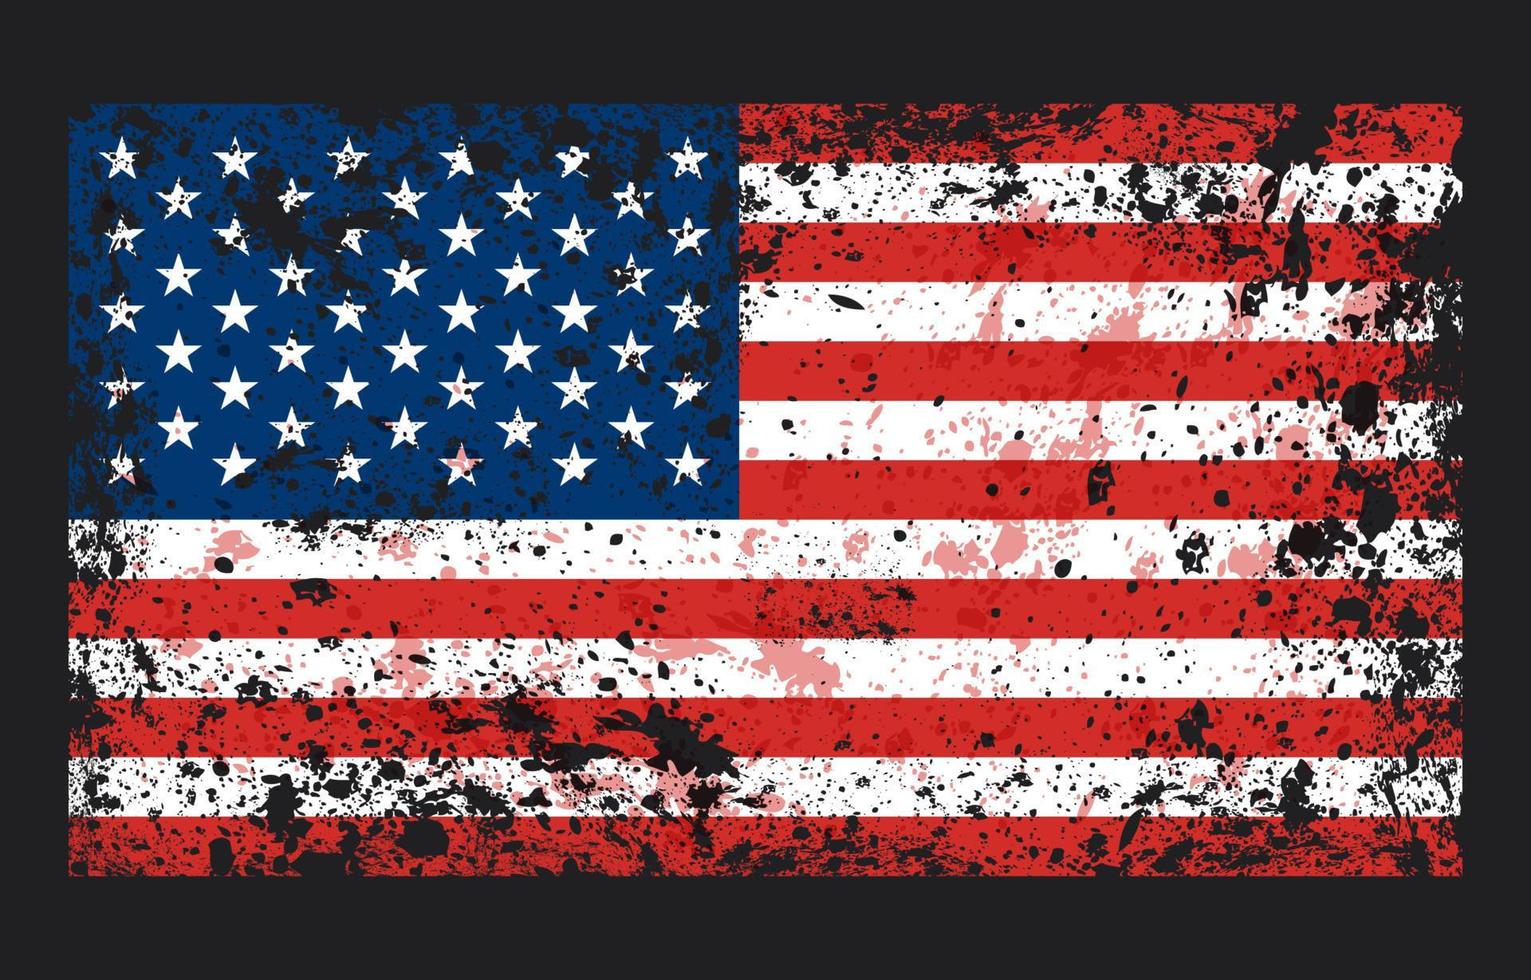 Distressed United States of America Flag Background vector